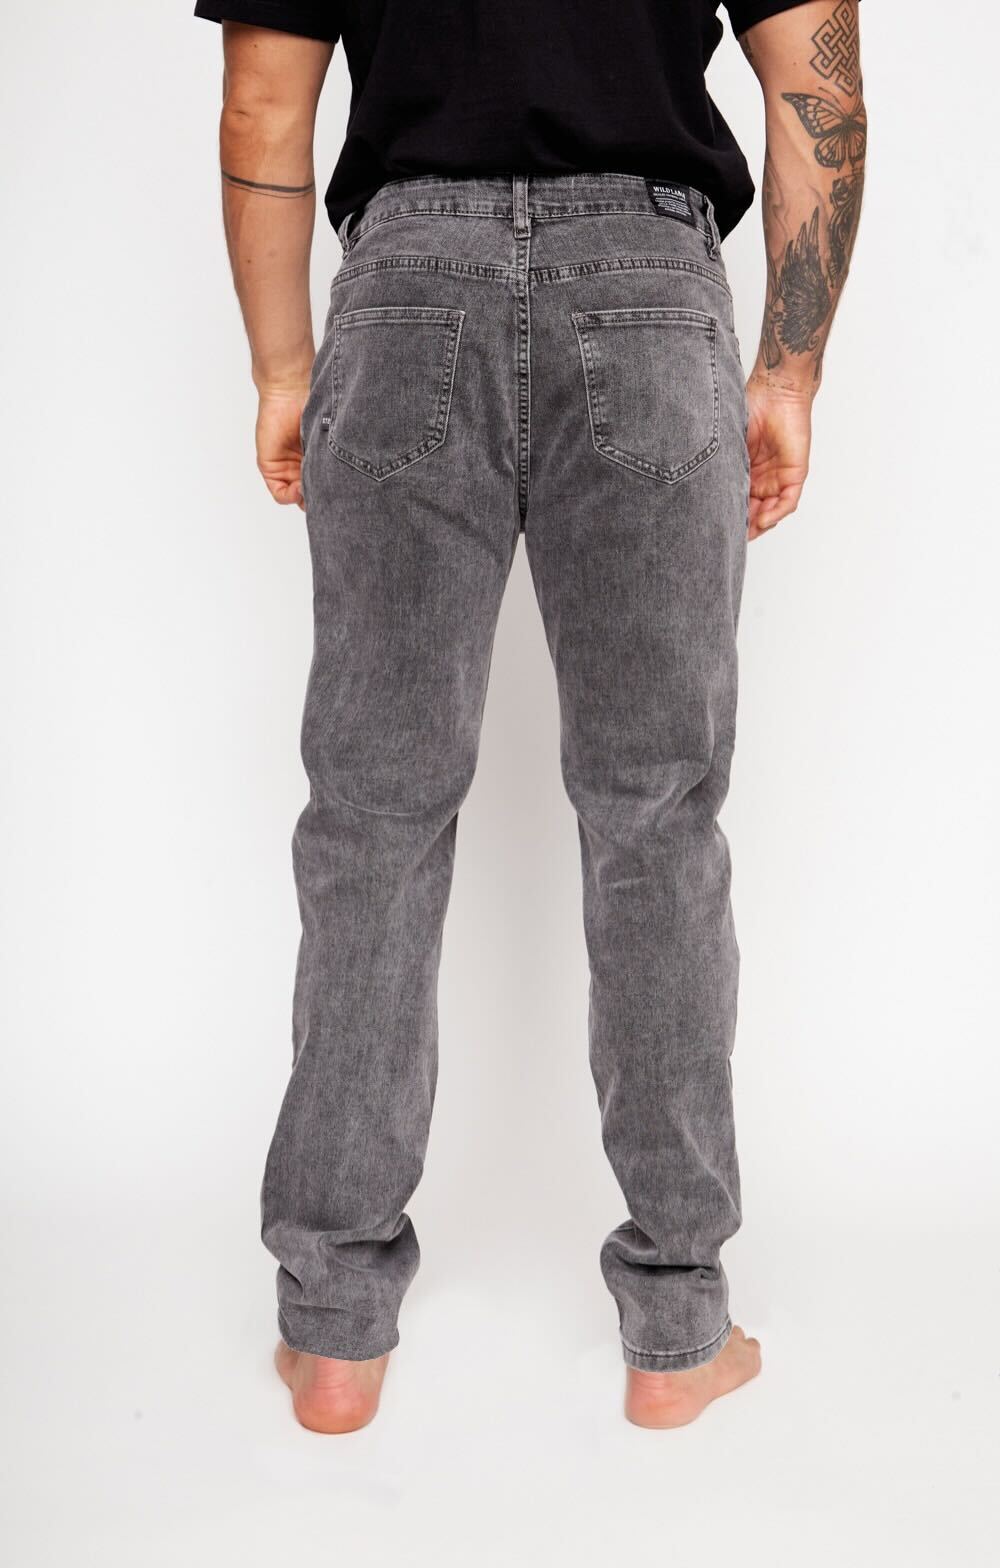 Jeans Gino Orgánico Gris Hombre